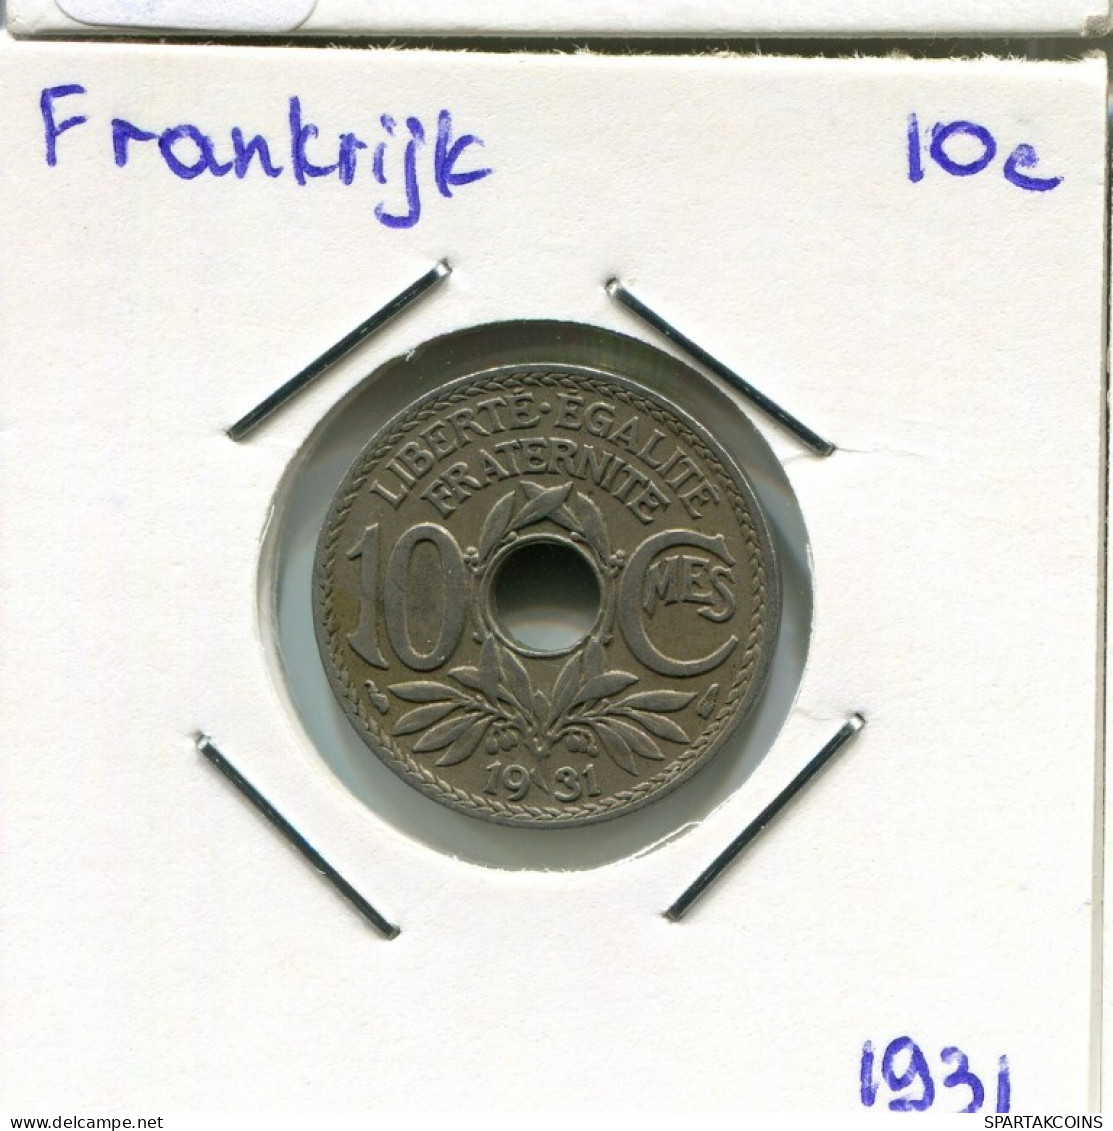 10 CENTIMES 1931 FRANCE Coin French Coin #AM795.U.A - 10 Centimes